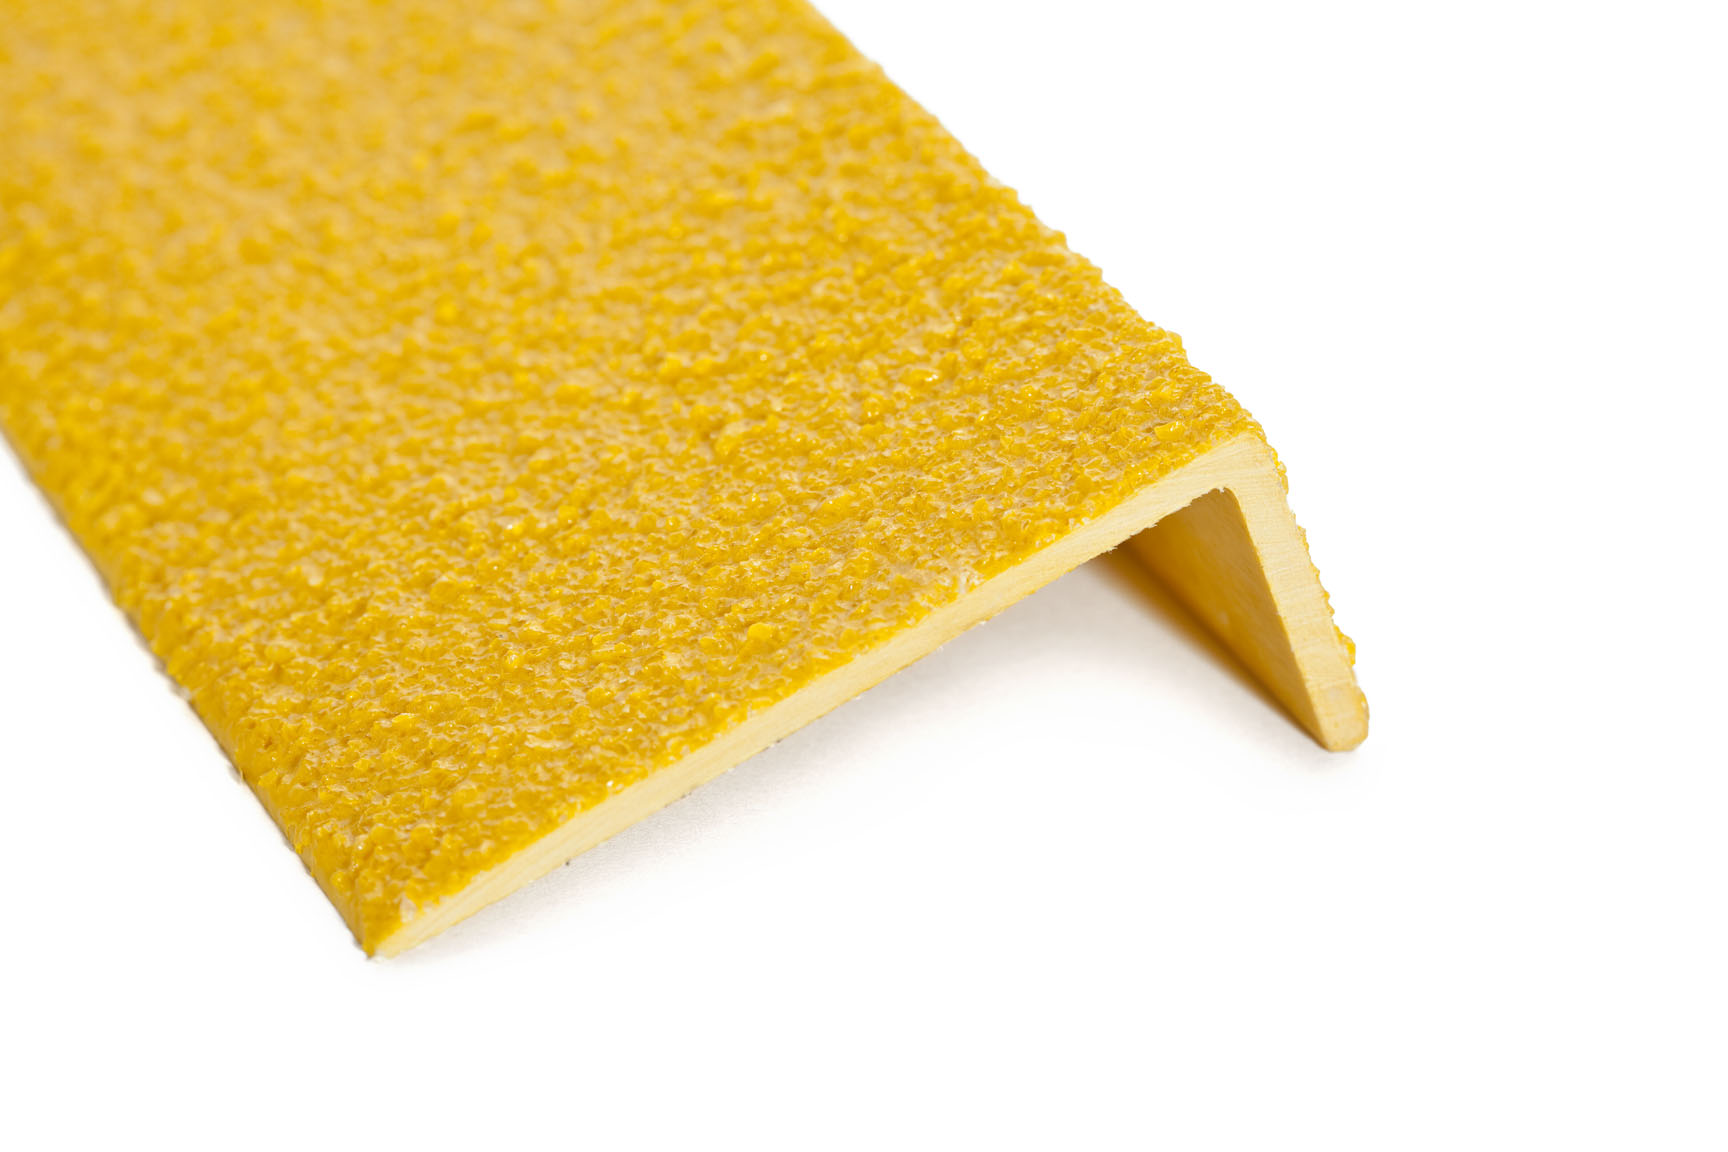 PTFSY25 Compisite fibreglass reinforced materail in Yellow 70mmx25mm